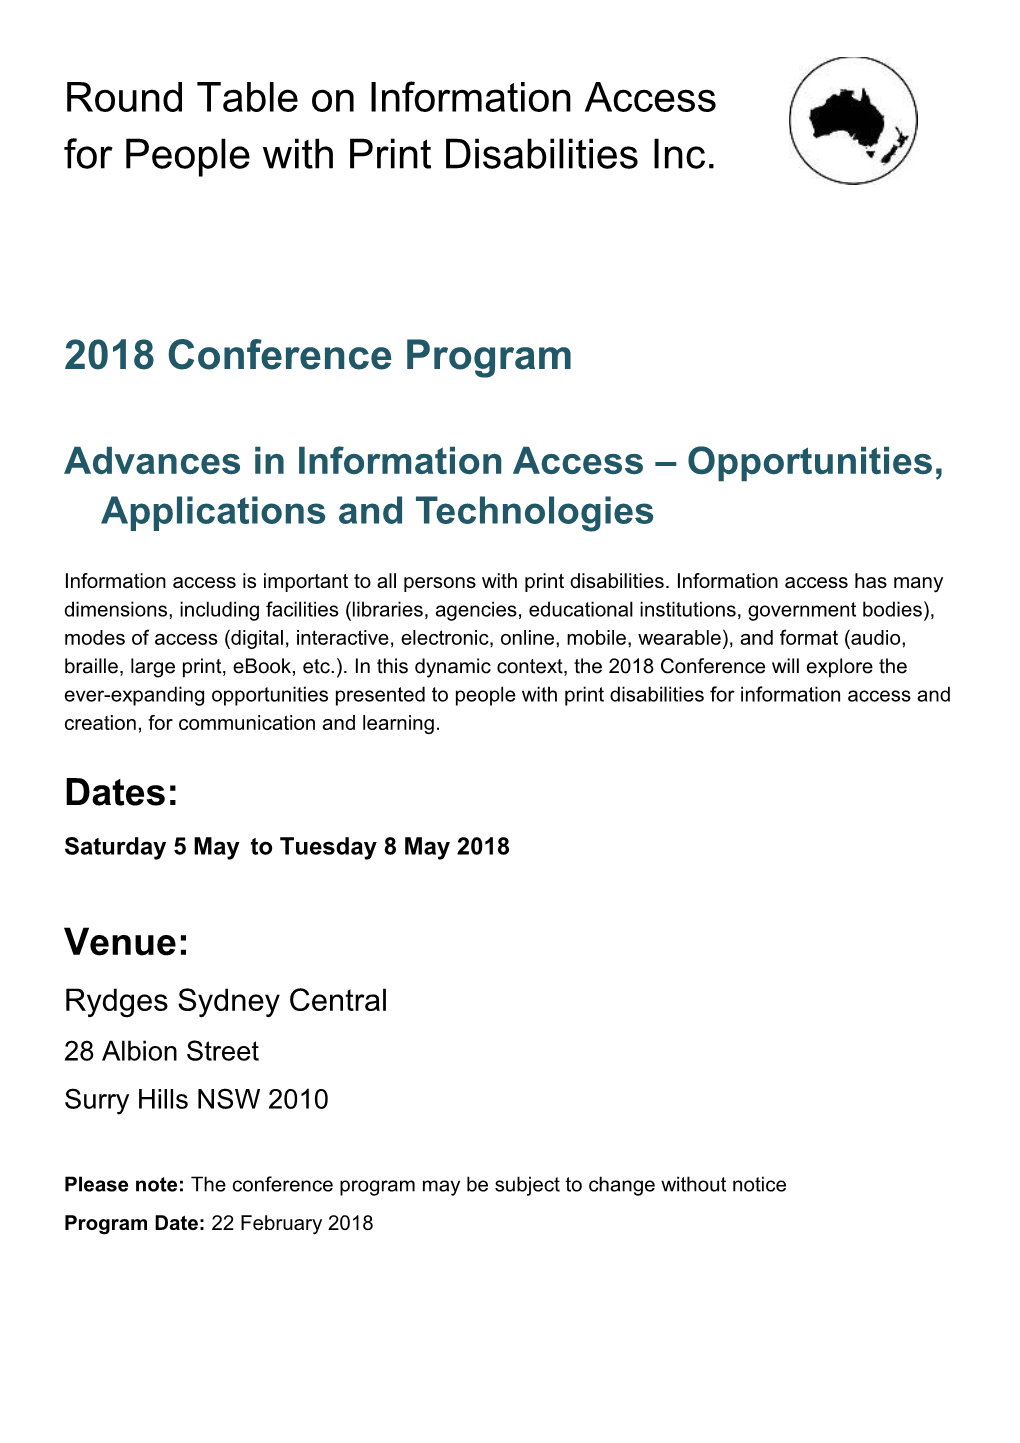 Advances in Information Access Opportunities, Applications and Technologies